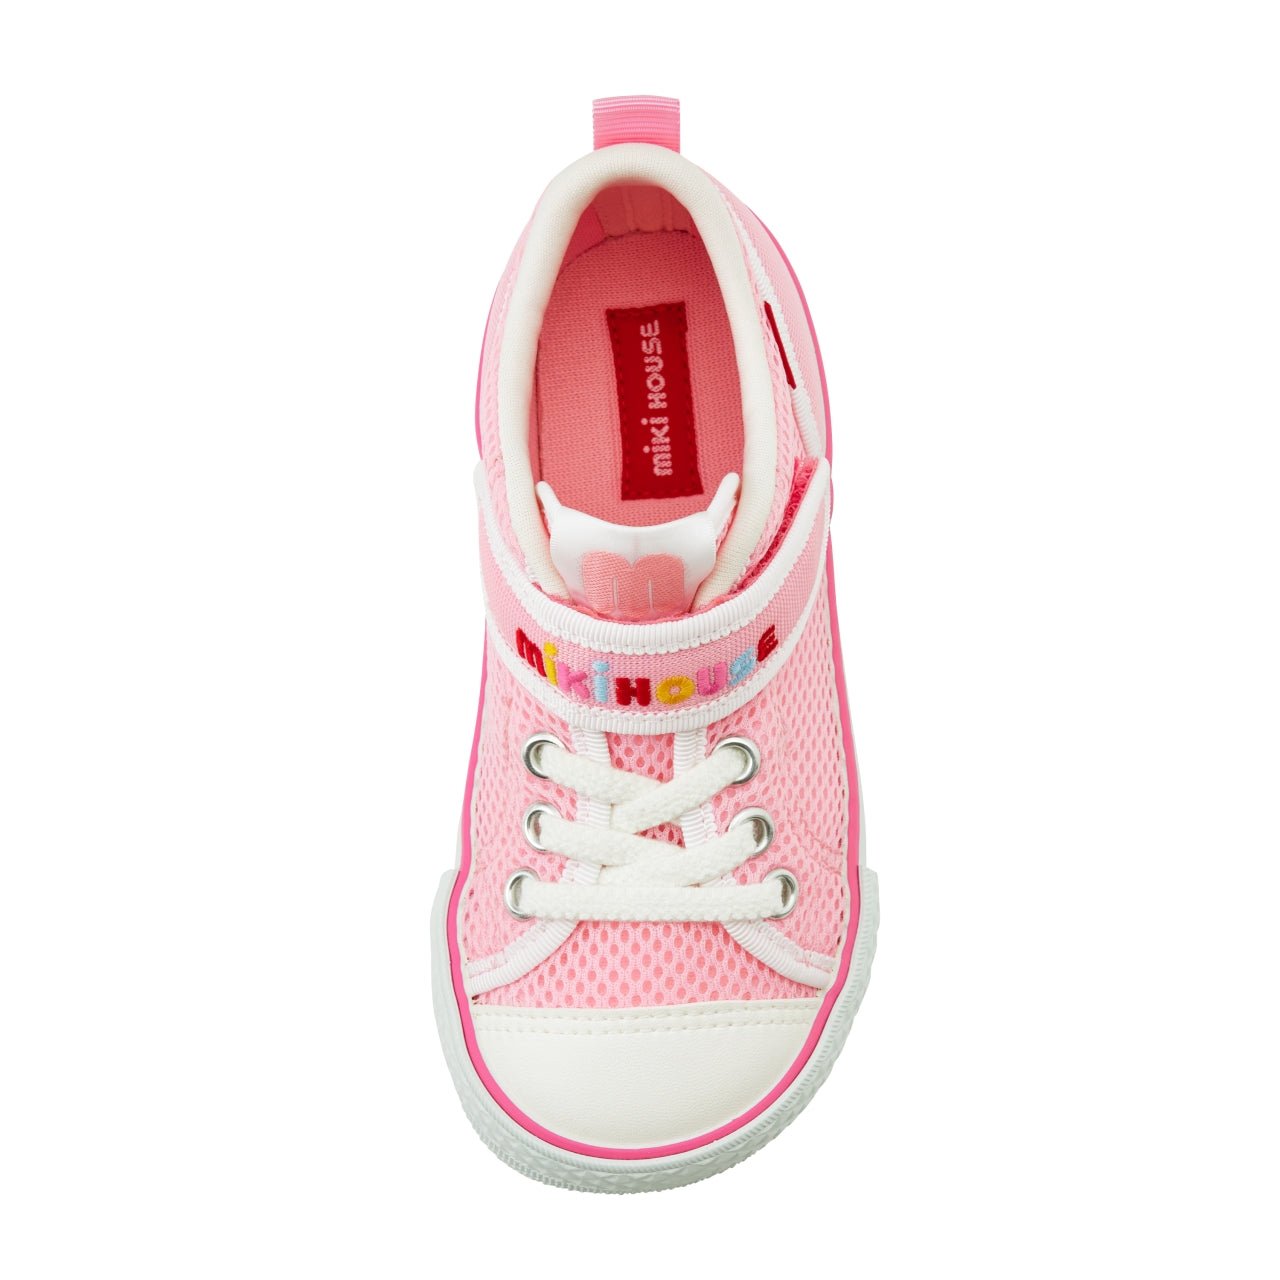 Double Russell Mesh Sneakers for Kids - Strawberry Milk